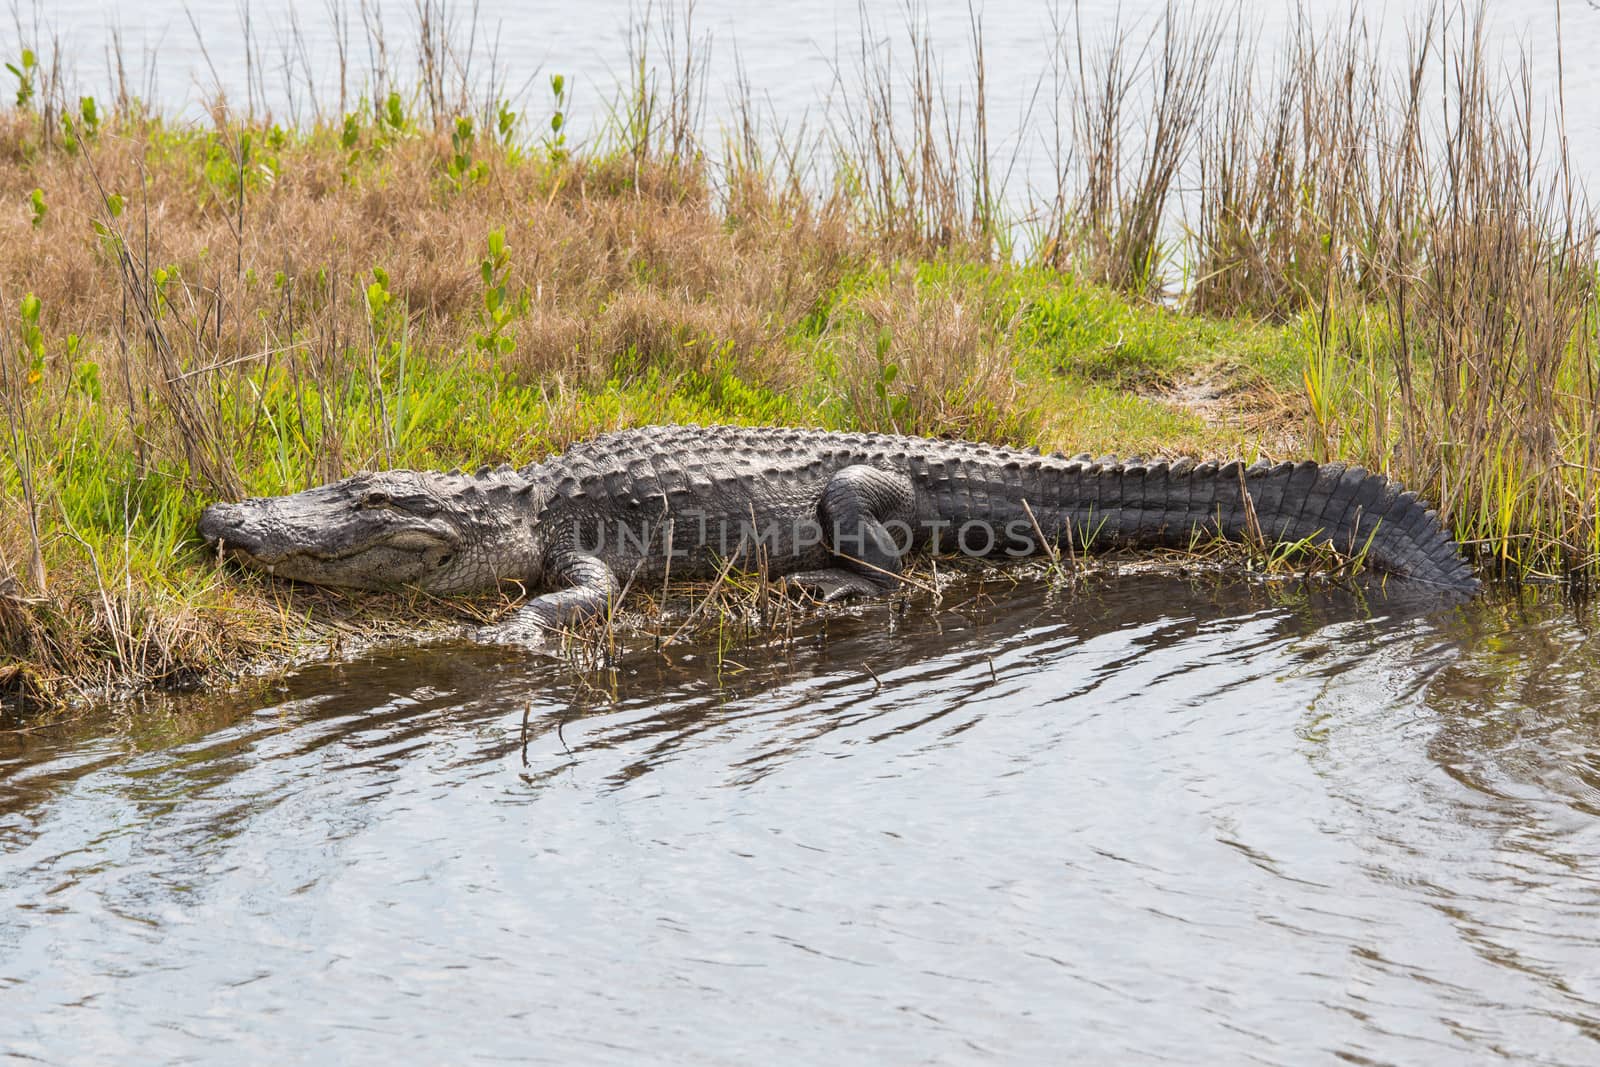 Gators don't seem to have problems with other critters disturbing their sleep. Other than the occasional photographer or tourist, life is good. The gator population has grown in recent years thanks to legislation and places like the Merritt Island National Wildlife Reserve.